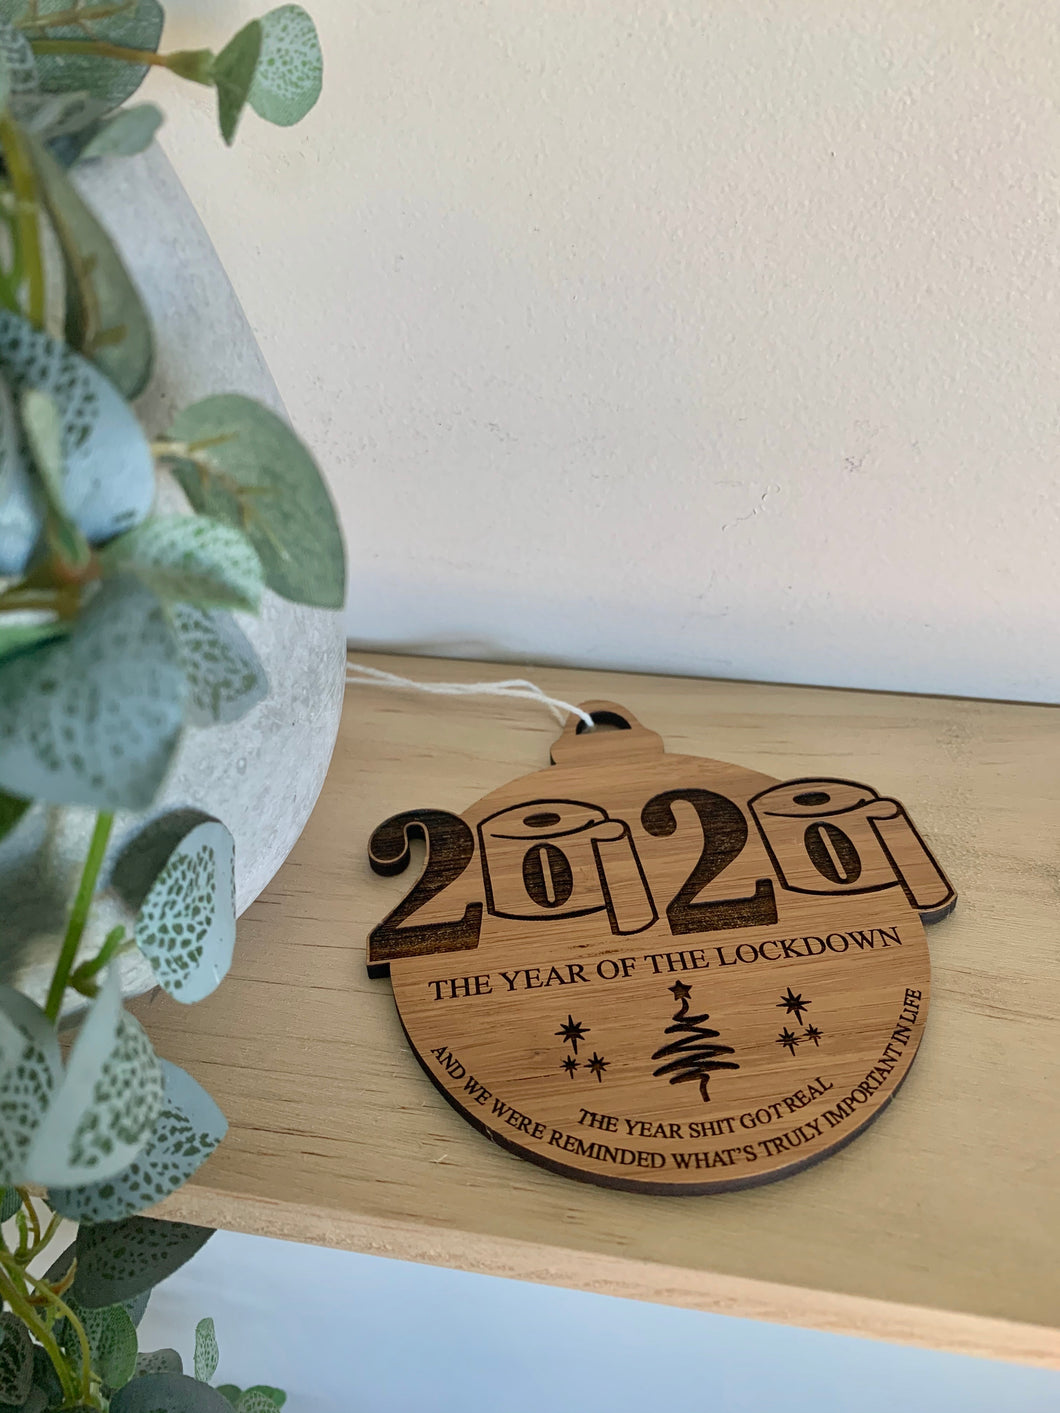 “2020 - THE YEAR OF THE LOCKDOWN” BAUBLE